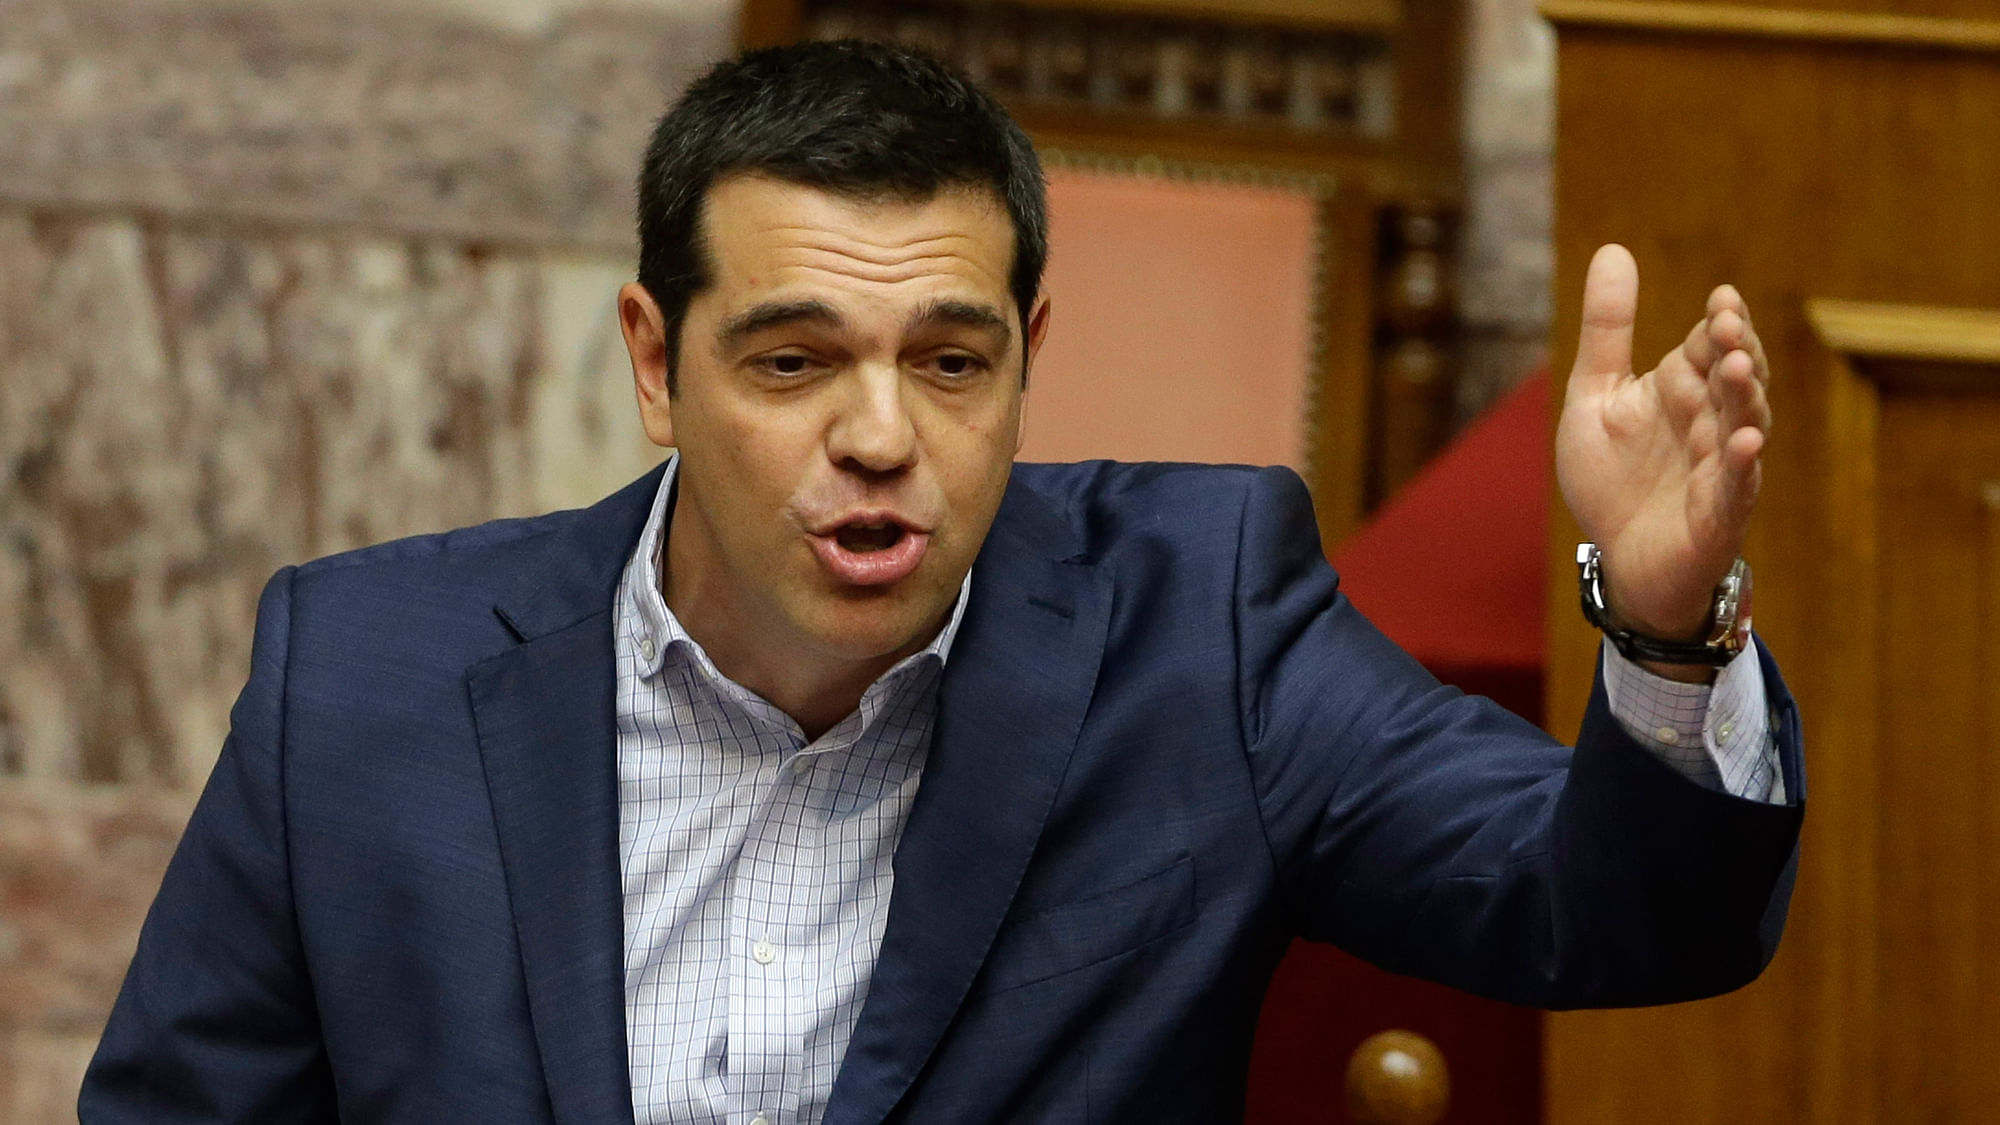 Greek Prime Minister Alexis Tsipras answers opposition questions in parliament in Athens, on Friday, July 31, 2015. (Photo: AP)